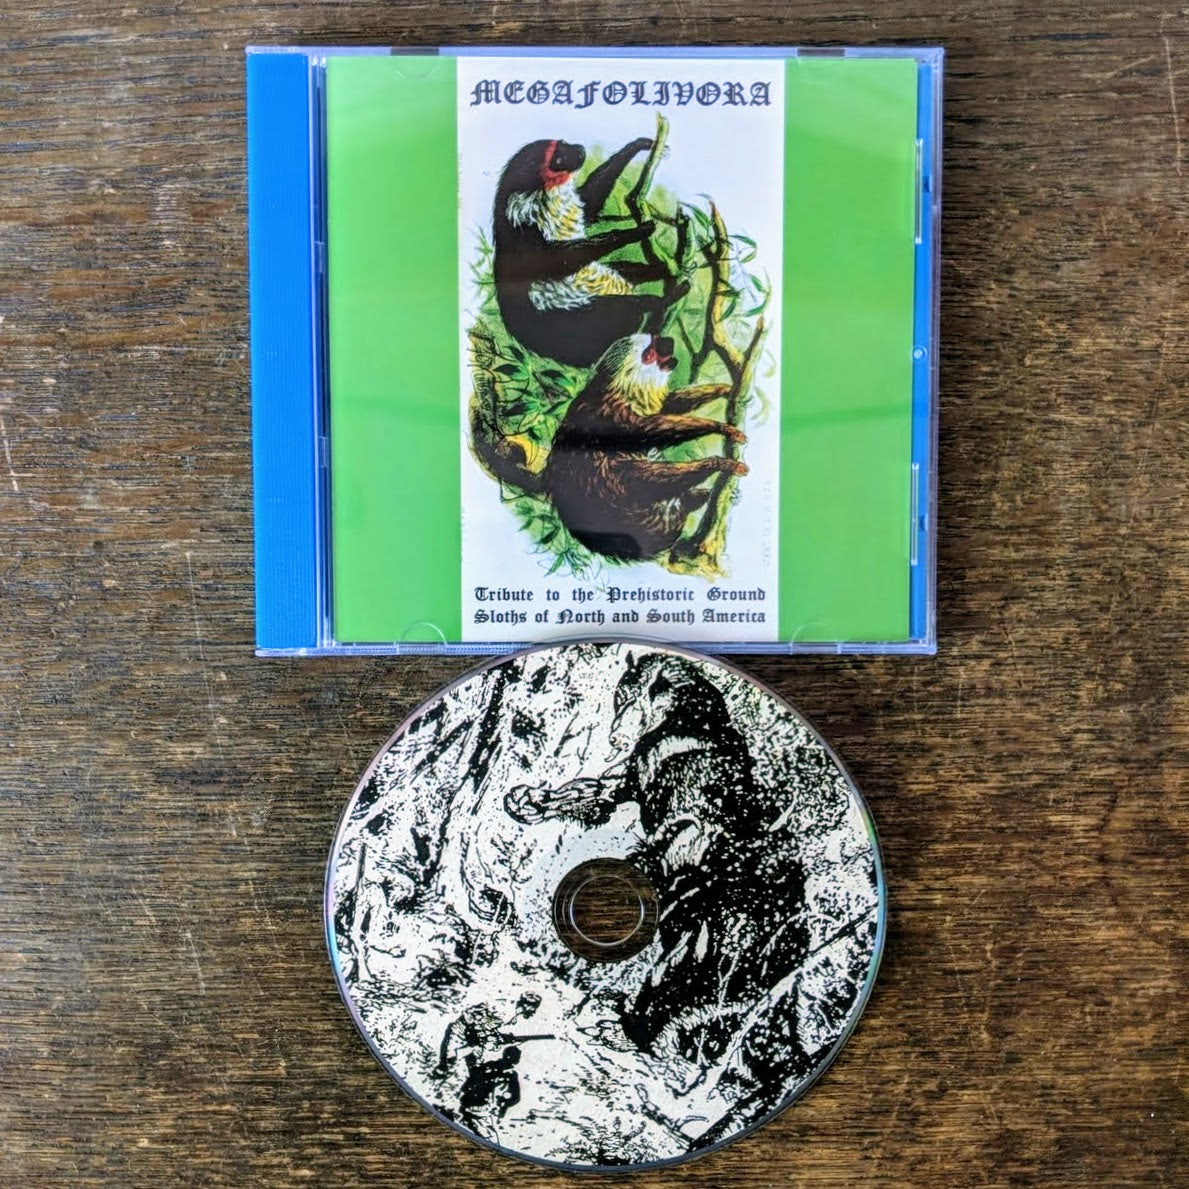 [SOLD OUT] MEGAFOLIVORA "Tribute To The Prehistoric Ground Sloths" CD (lim. 100)